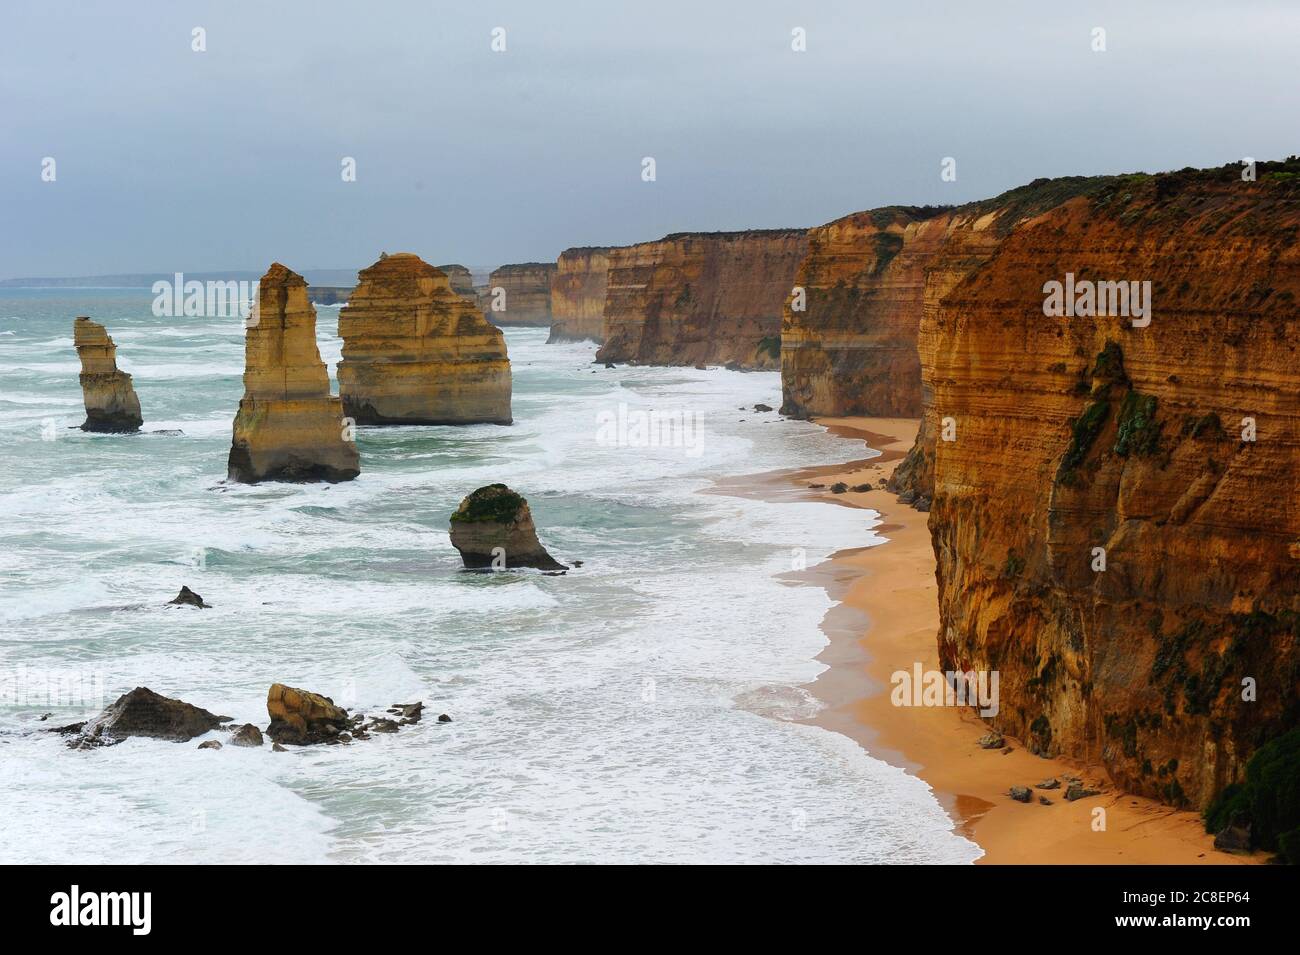 Scenic rock formation Twelve Apostles along the steep cliff coast of Great Ocean Road in Victoria, Australia, with overcast cloudy sky and wild ocean. Stock Photo